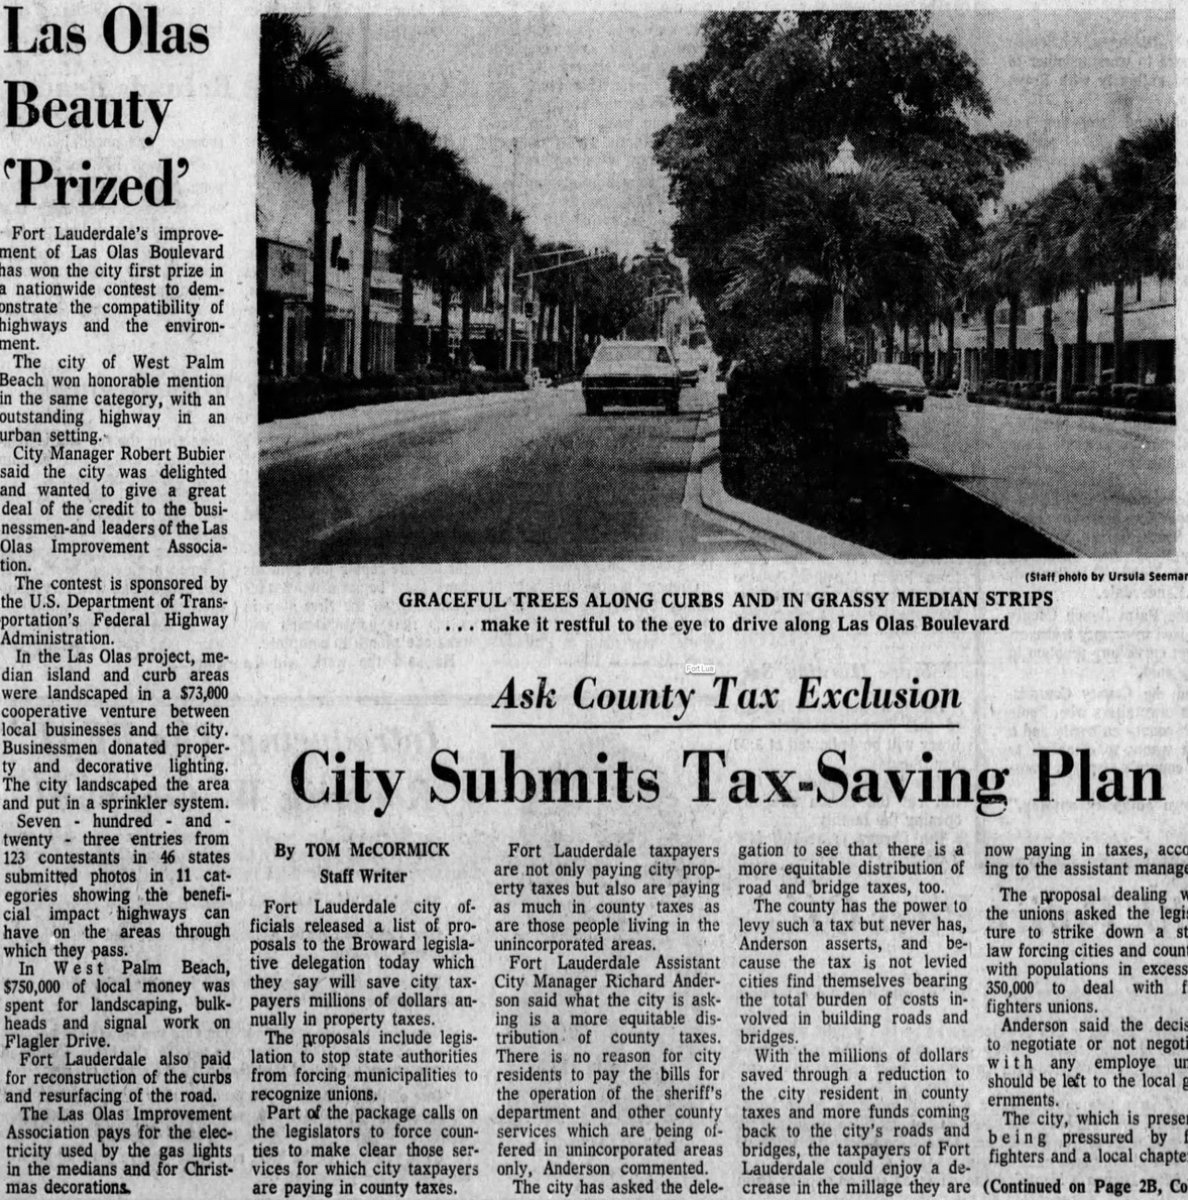 I hope future generations will look back at these @SunSentinel headlines and be grateful a group of us stood strong and protected these iconic beautiful trees for their generation.